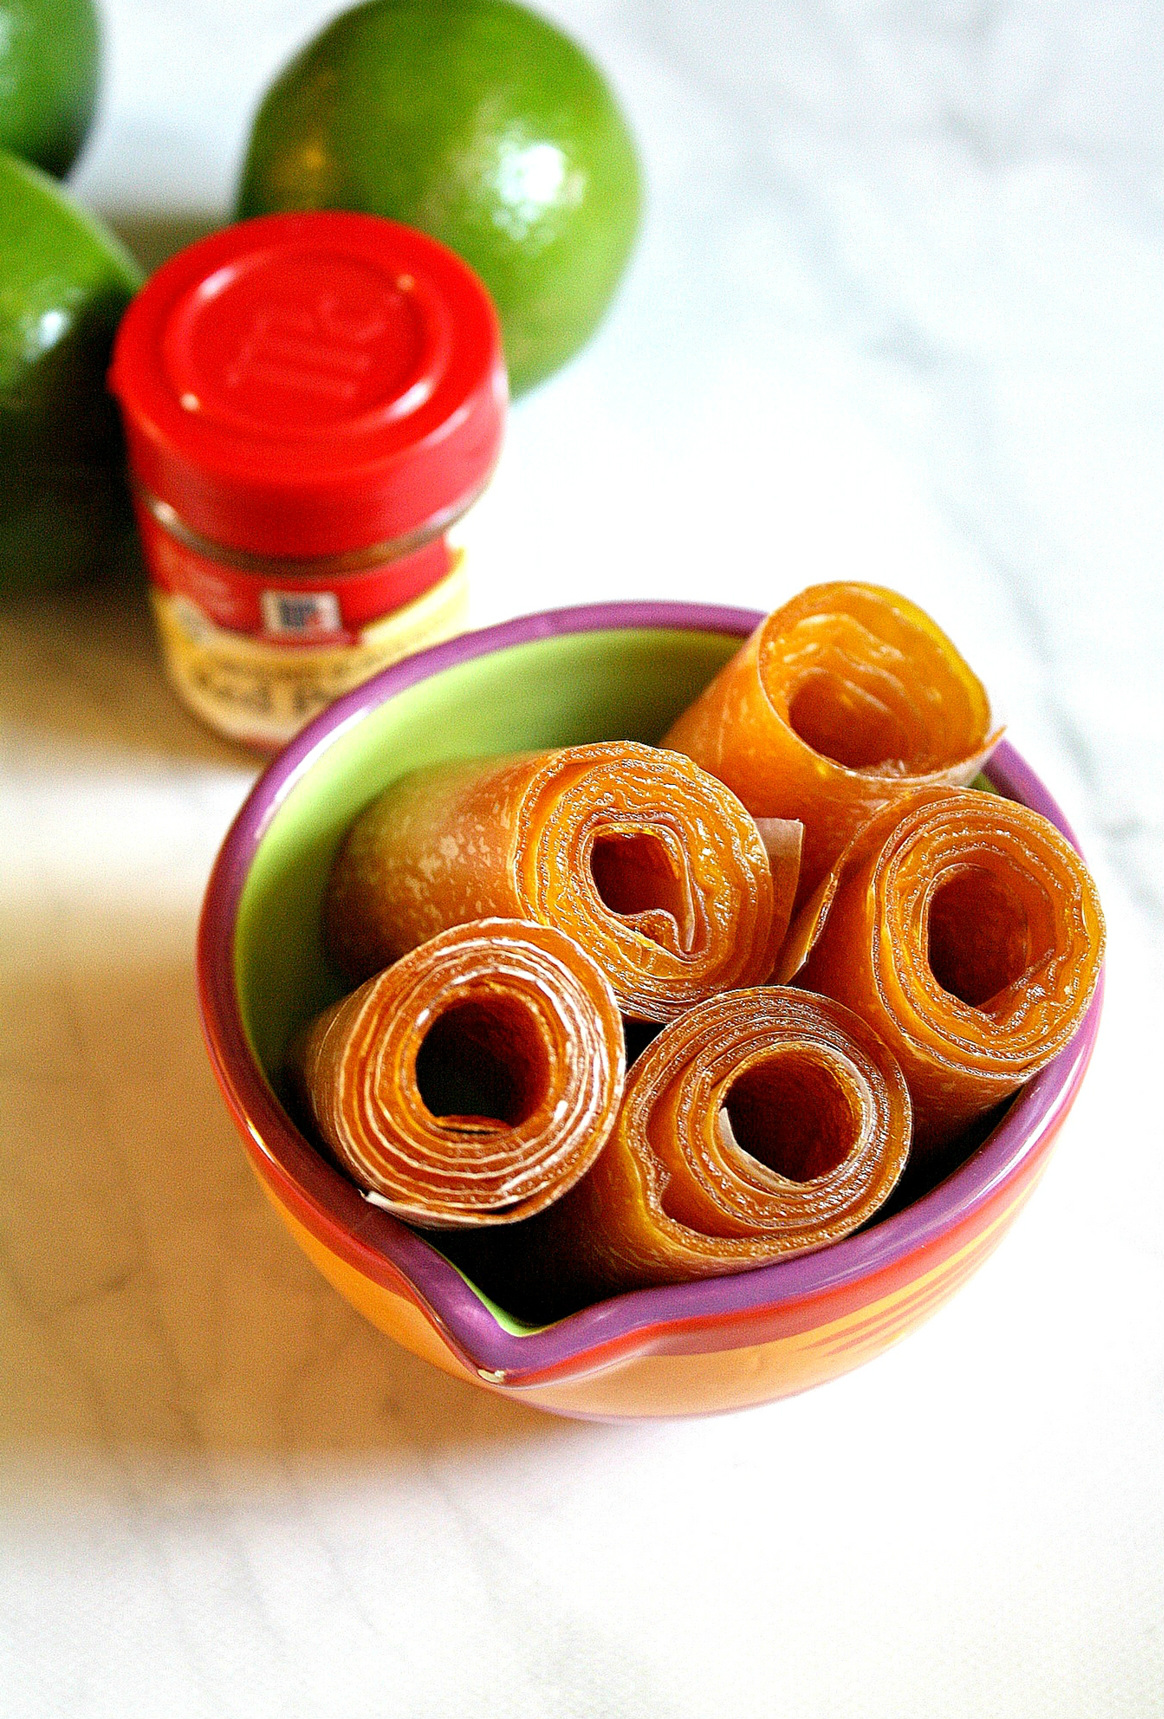 Tropical Fruit Leather Recipe (Fruit Roll Ups) - CPM